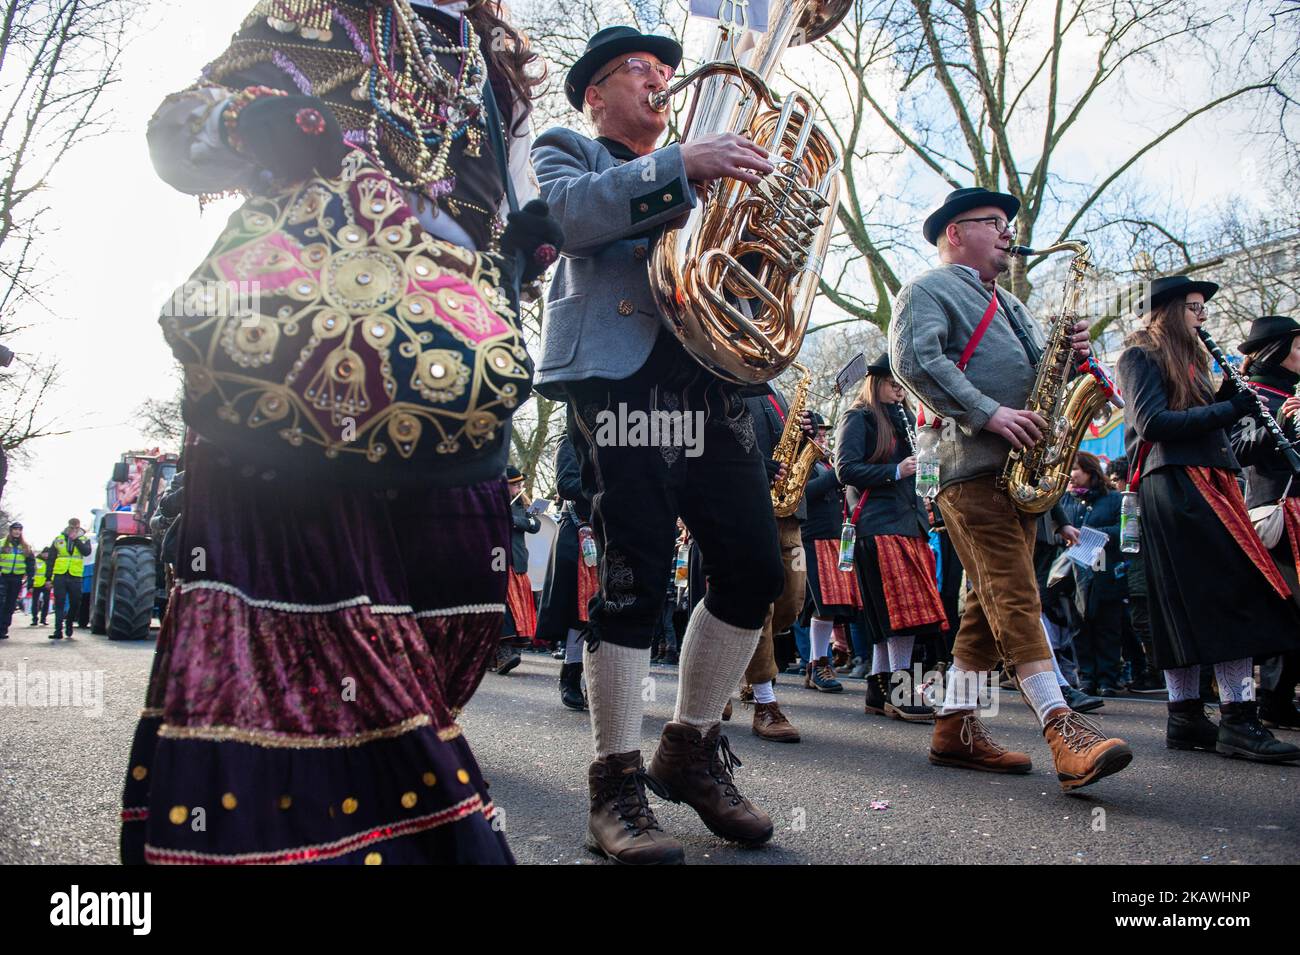 In Düsseldorf, Germany, on February 12th 2018, the calendar of Carnival events features no fewer than 300 Carnival shows, balls, anniversaries, receptions and costume parties. The motto this season is ‘Jeck erst recht’ (Carnival more than ever). The celebrations culminate in the Rose Monday Parade. More than 30 music ensembles and 5,000 participants join the procession through the city. Elaborately built and decorated floats address cultural and political issues and can be satirical, hilarious and even controversial. The politically themed floats of satirist Jacques Tilly are famous the world  Stock Photo